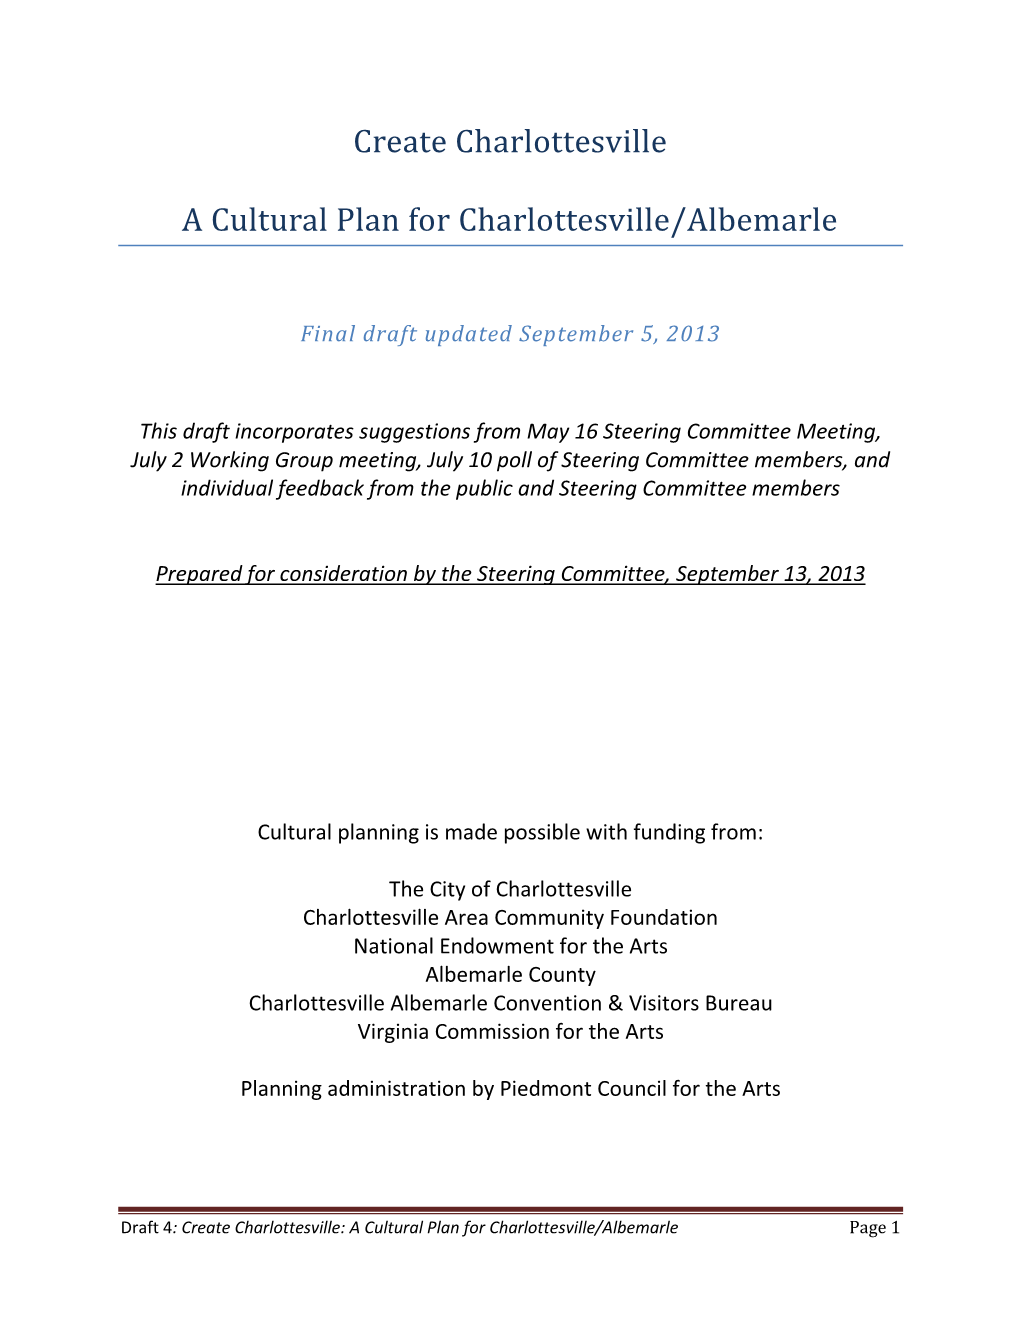 Create Charlottesville a Cultural Plan for Charlottesville/Albemarle